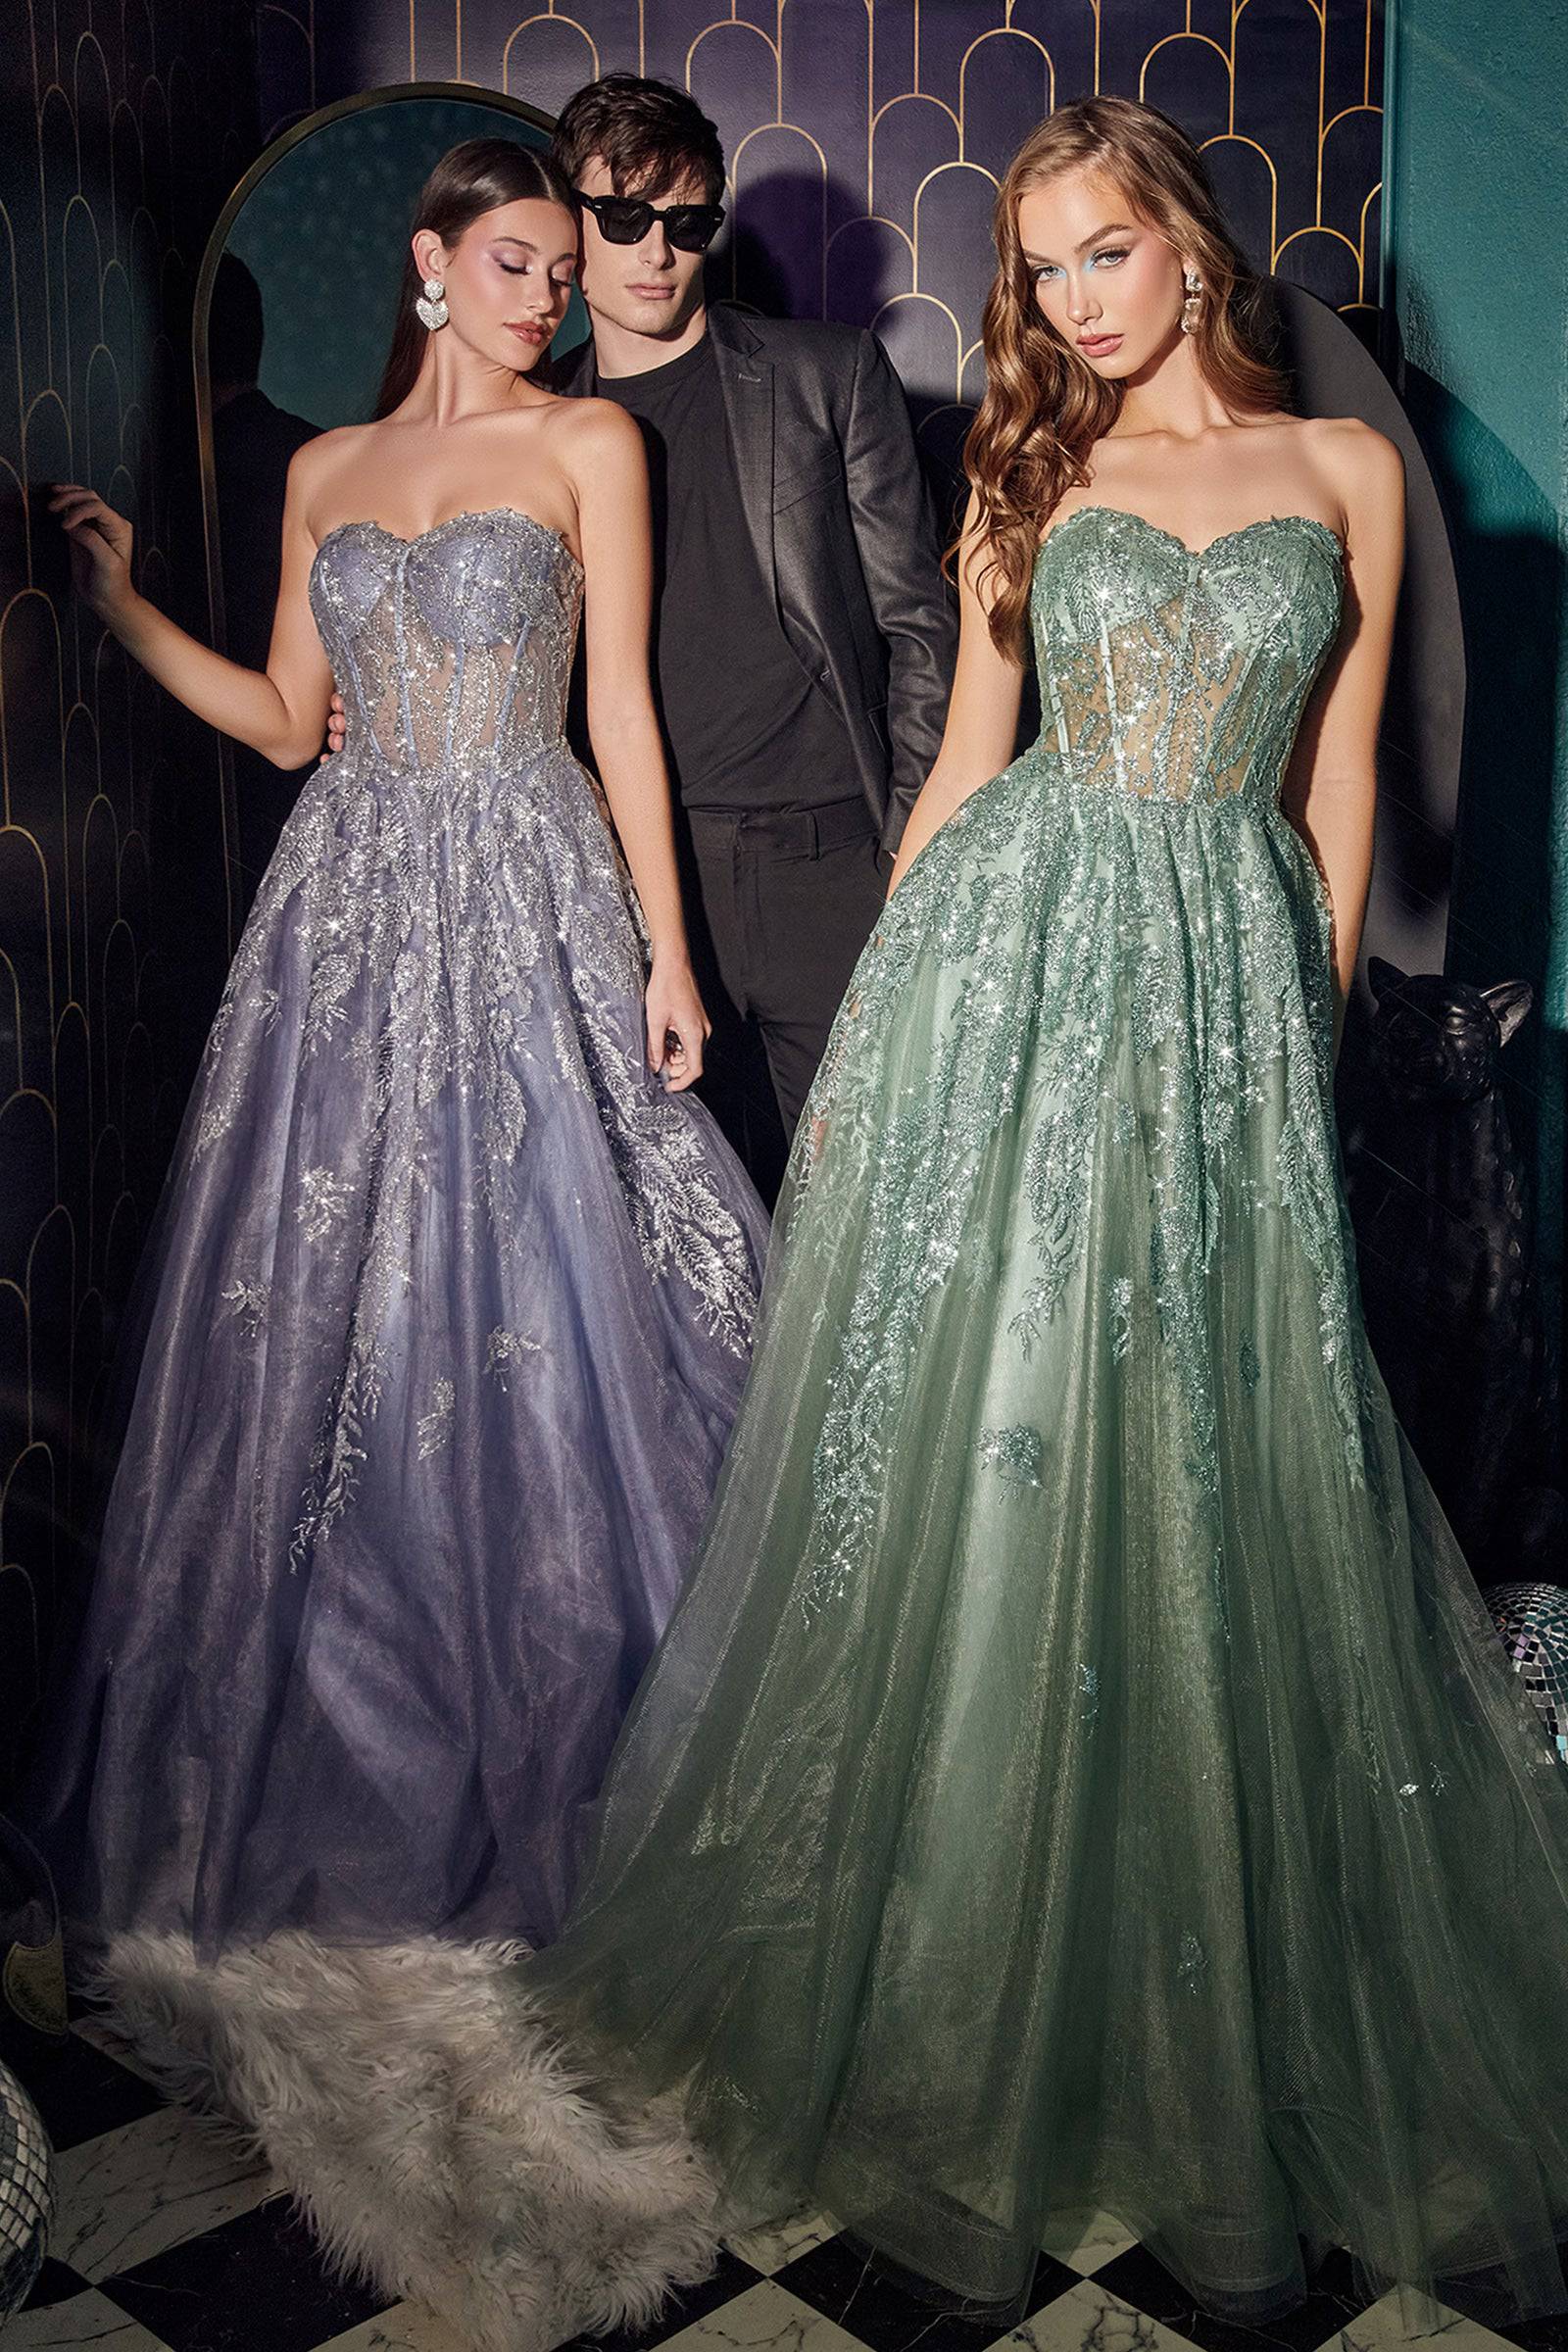 Sparkly Long Sequin Prom Dresses, Unique Short Sequined Prom Gowns